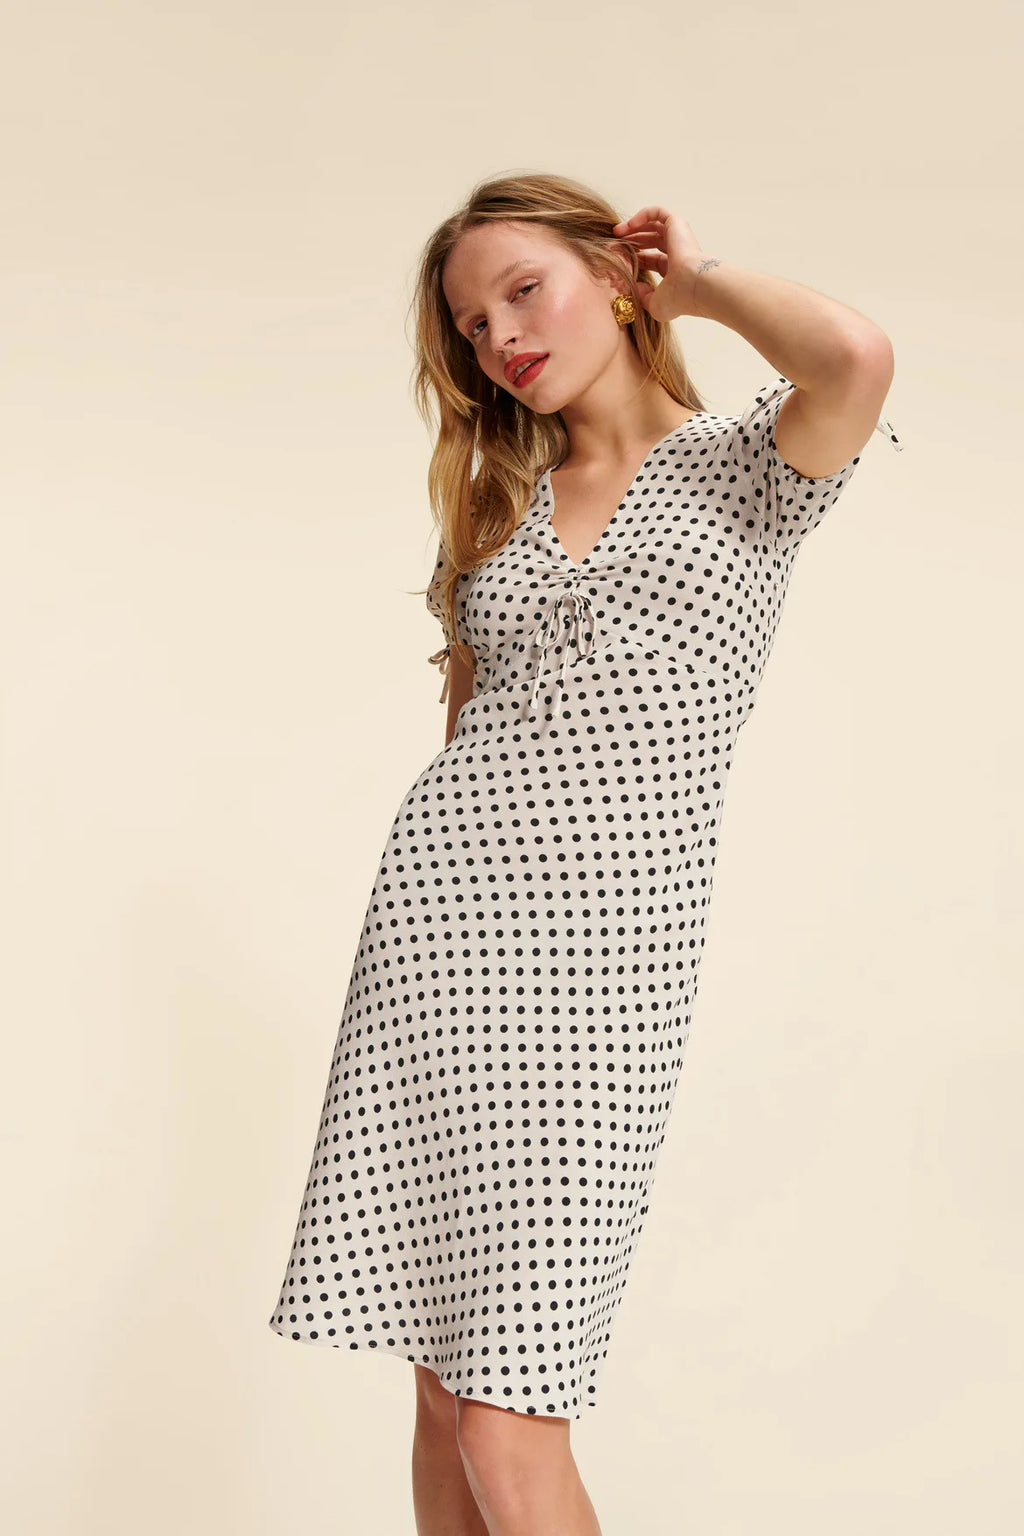 Welcome summer with style with our Dress Sybillia. This beautiful A-line dress features a trendy polka dot pattern and a flattering V-neck design. The drawstring waist allows for a customized fit, while the bubble short sleeves add a playful touch. Perfect for any occasion, this dress will make you stand out and feel confident all summer long.